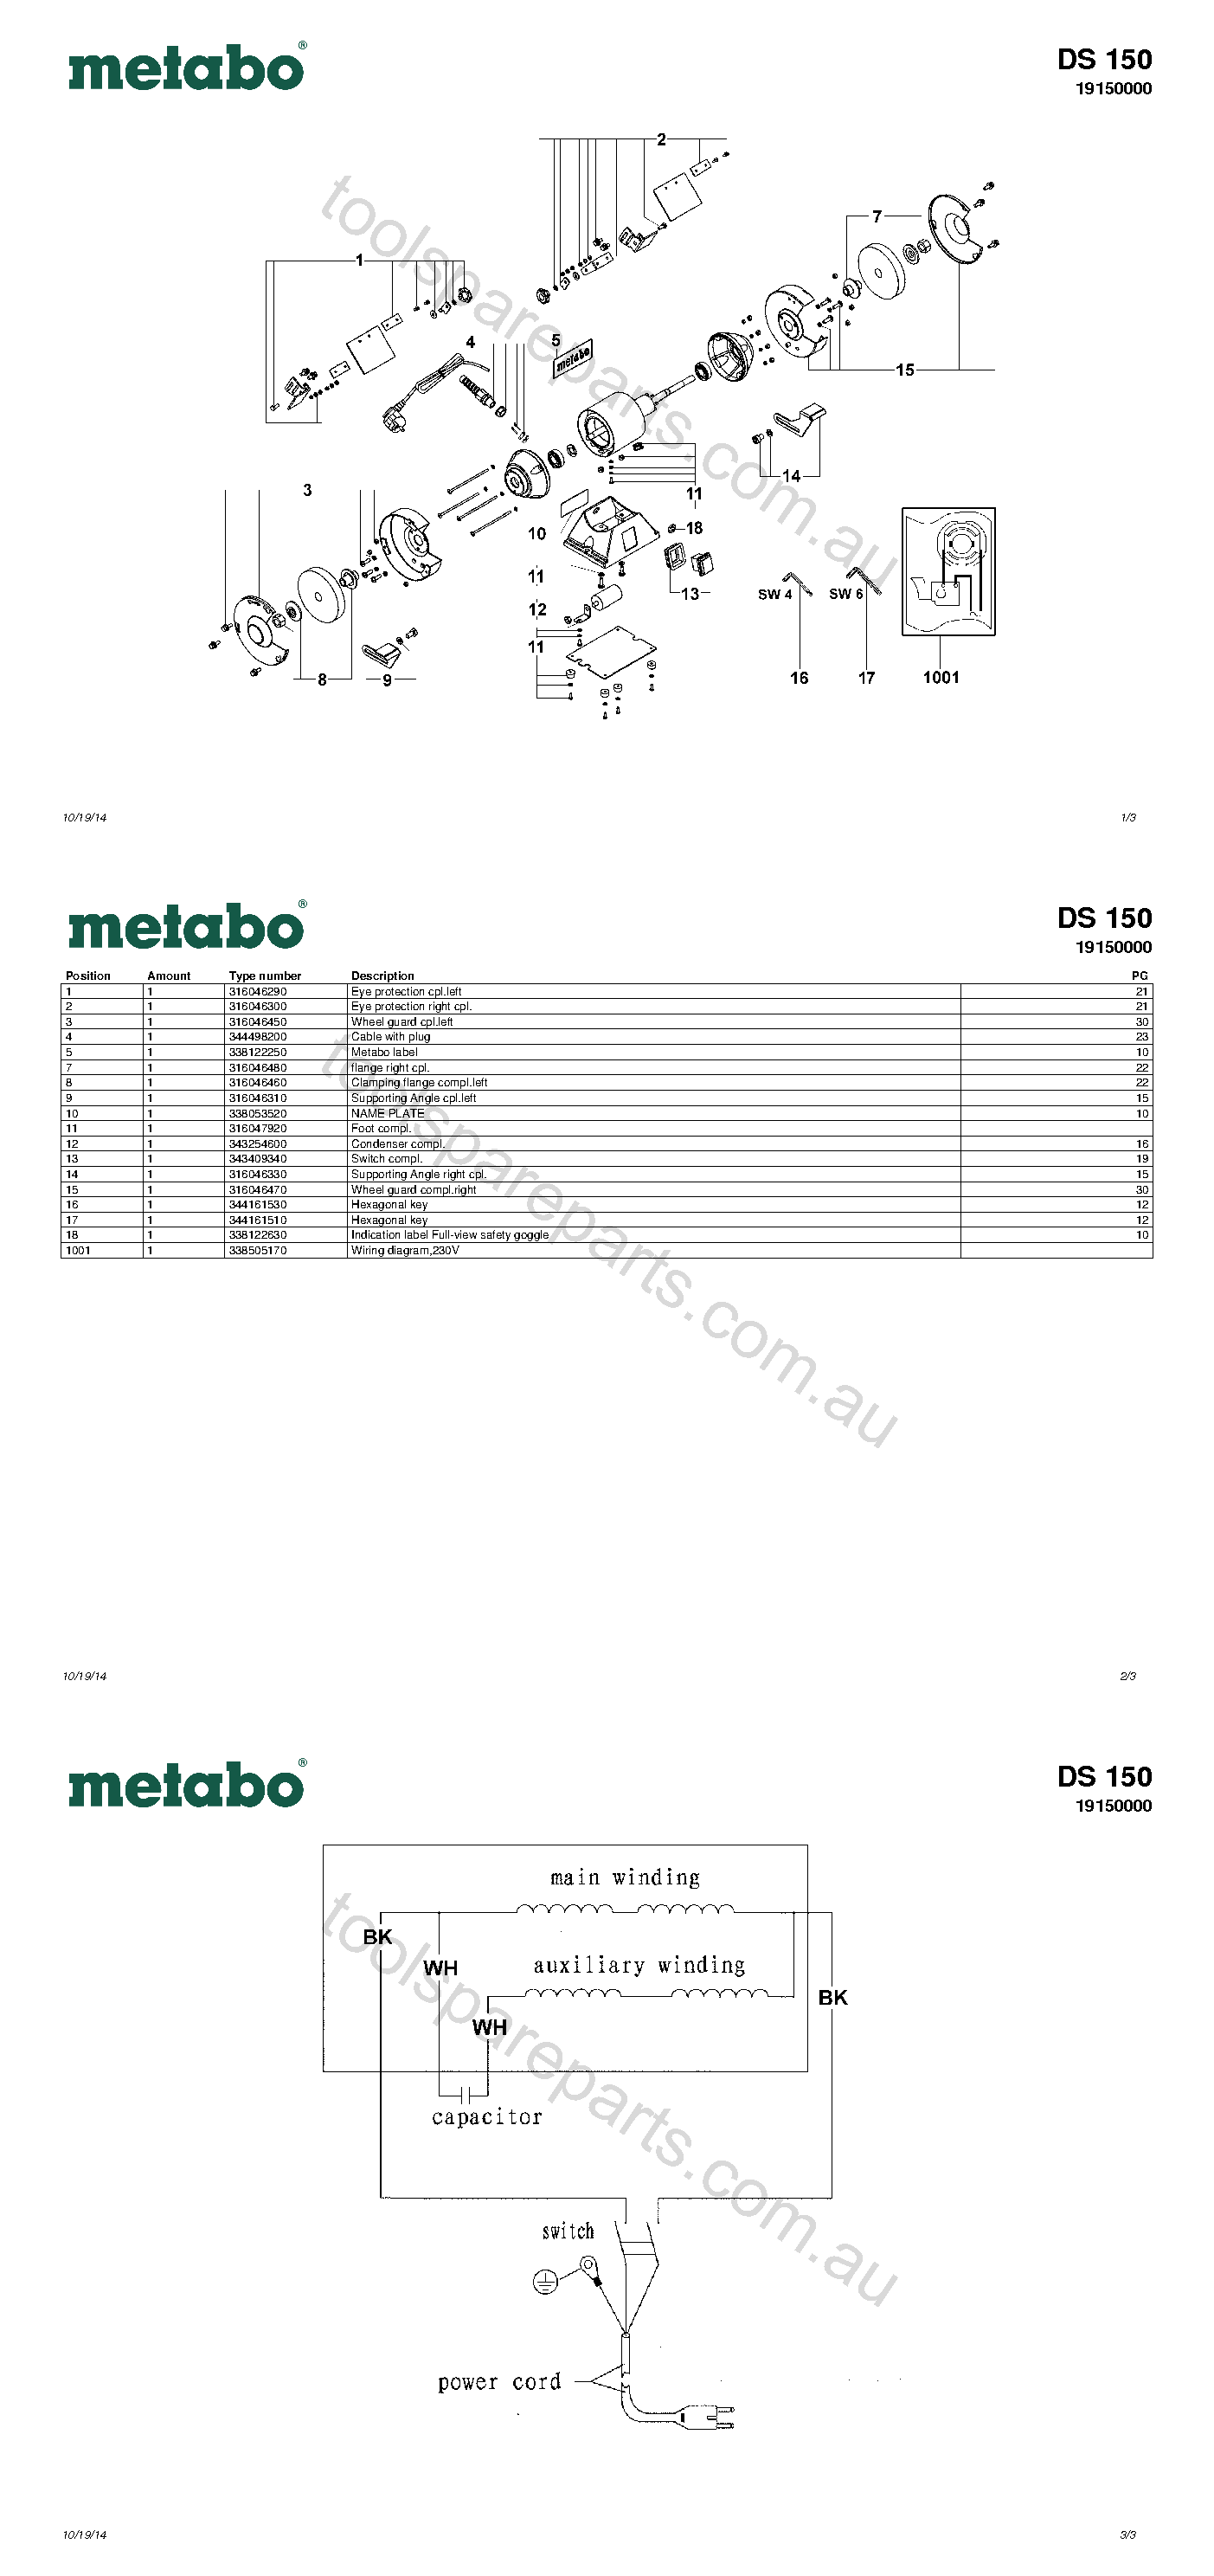 Metabo DS 150 19150000  Diagram 1